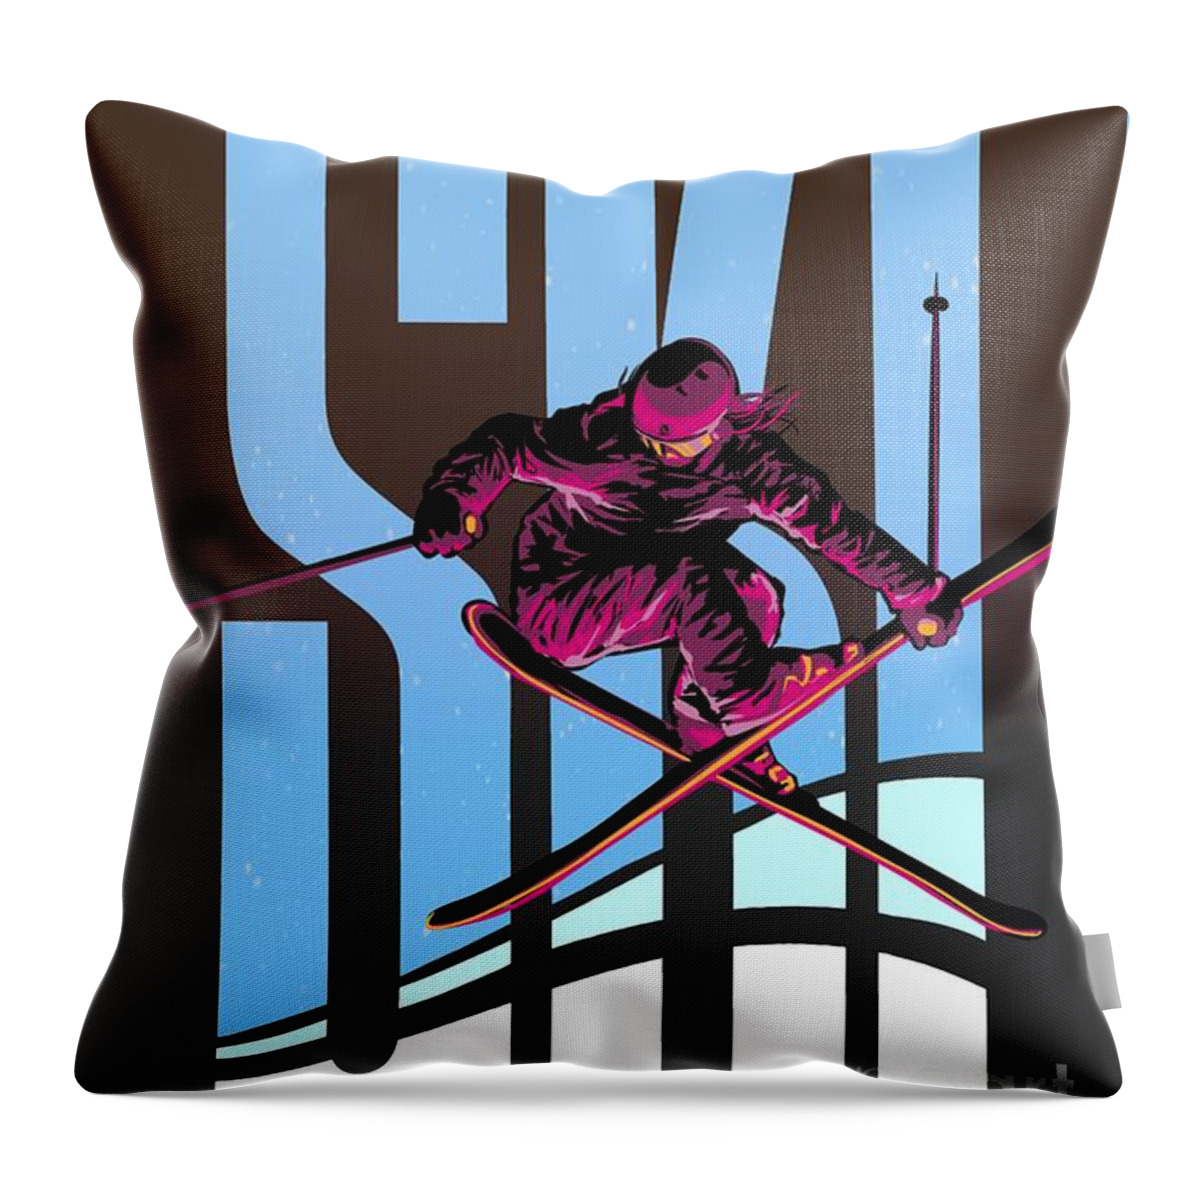 Freestyle Skiing Throw Pillow featuring the painting Revelski by Sassan Filsoof